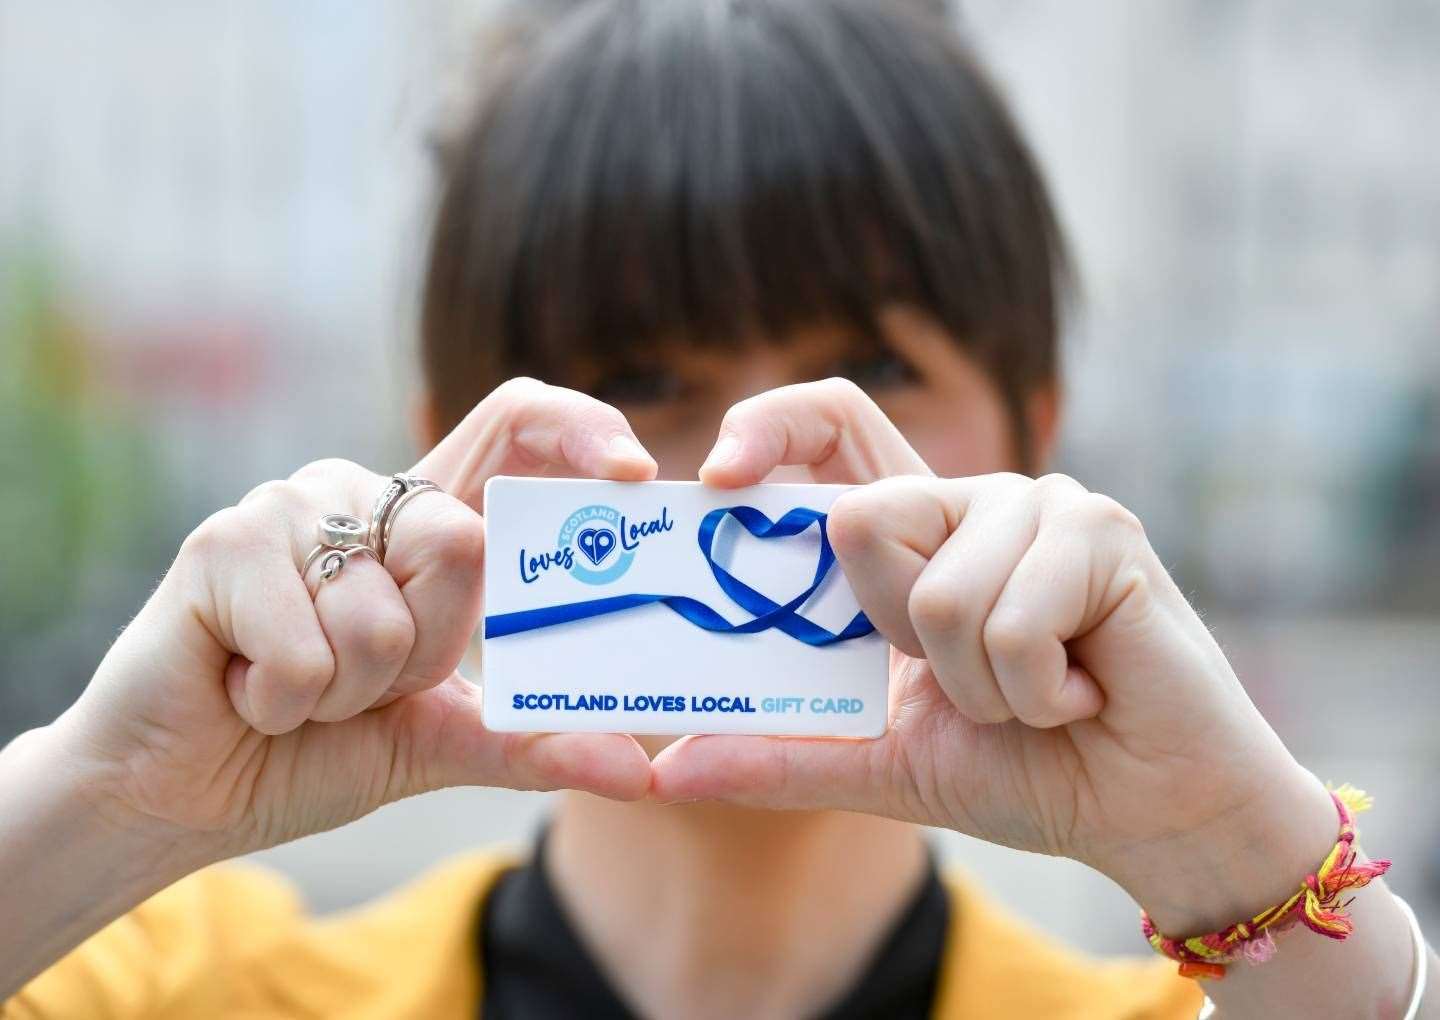 An Aberdeenshire Loves Local card is set to be launched.